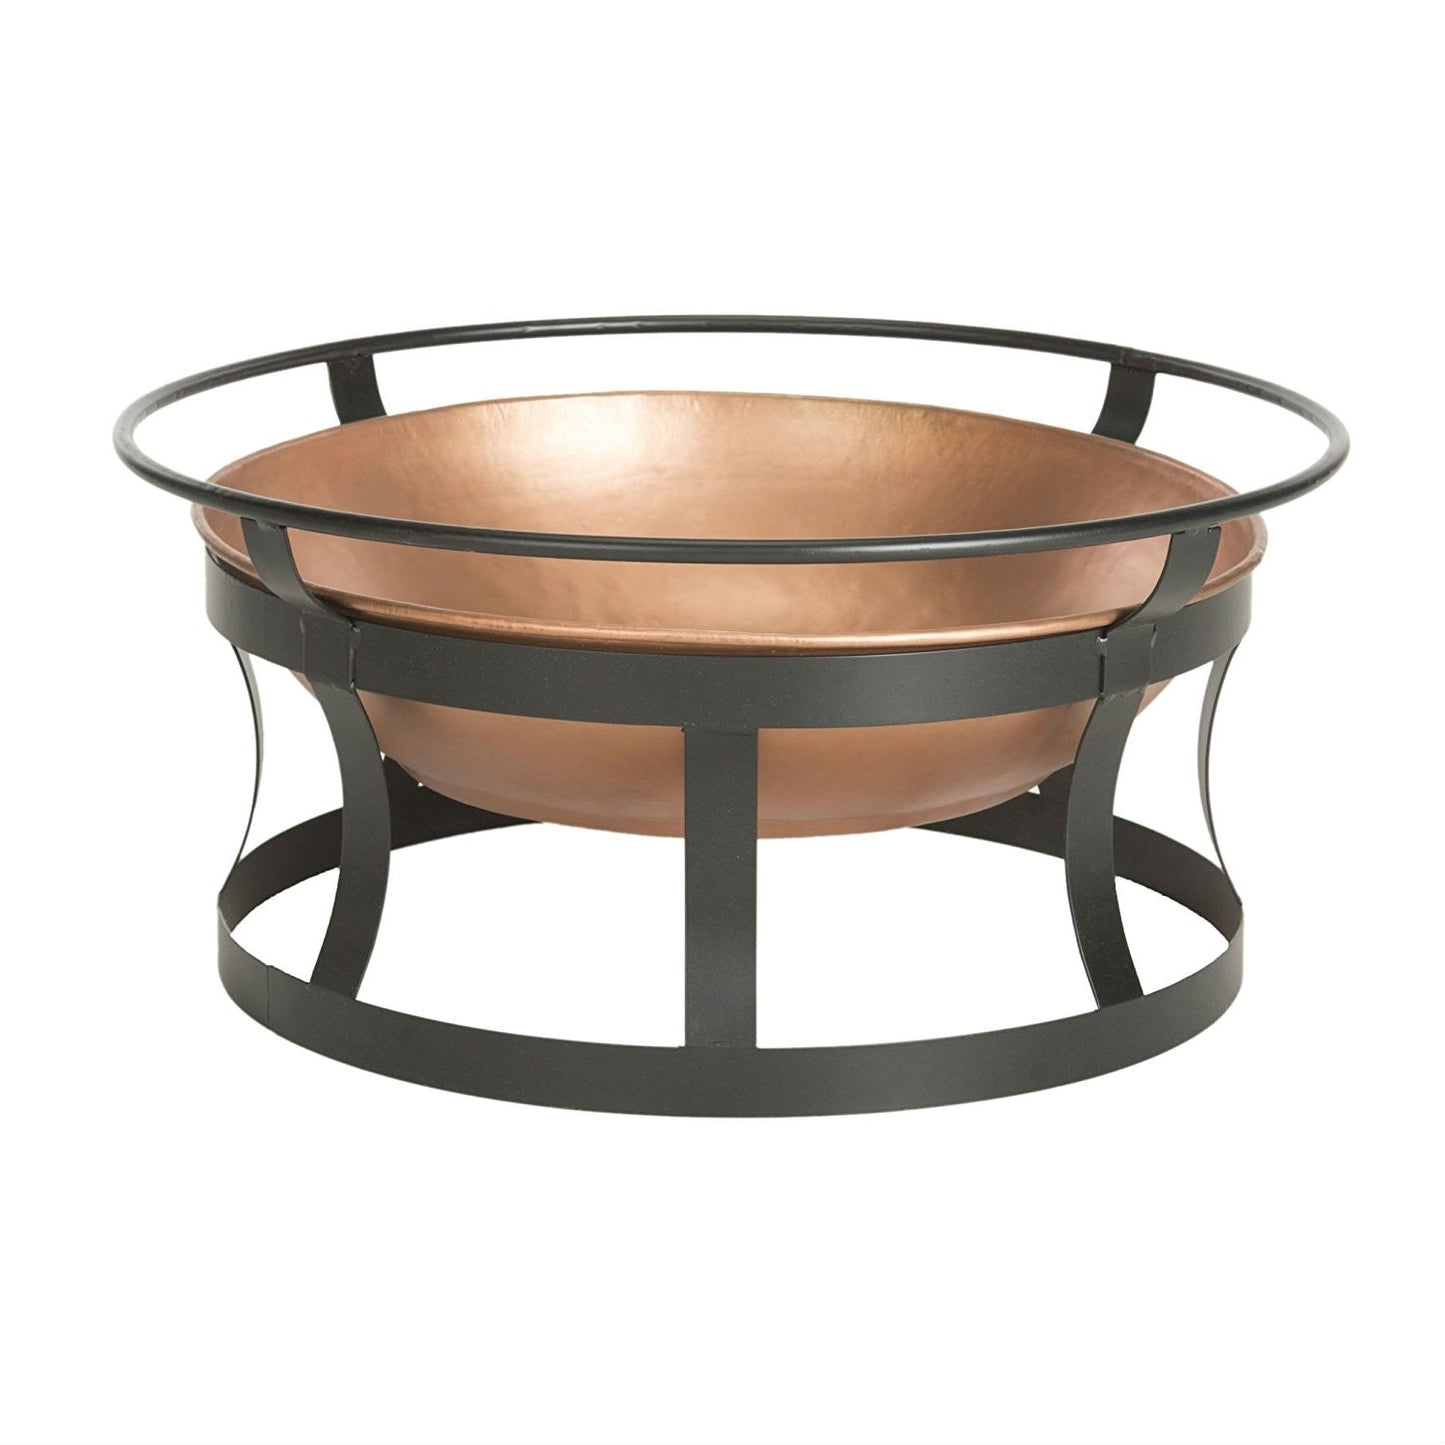 Copper Finish Fire Pit with Black Iron Stand Grate and Fire Poker